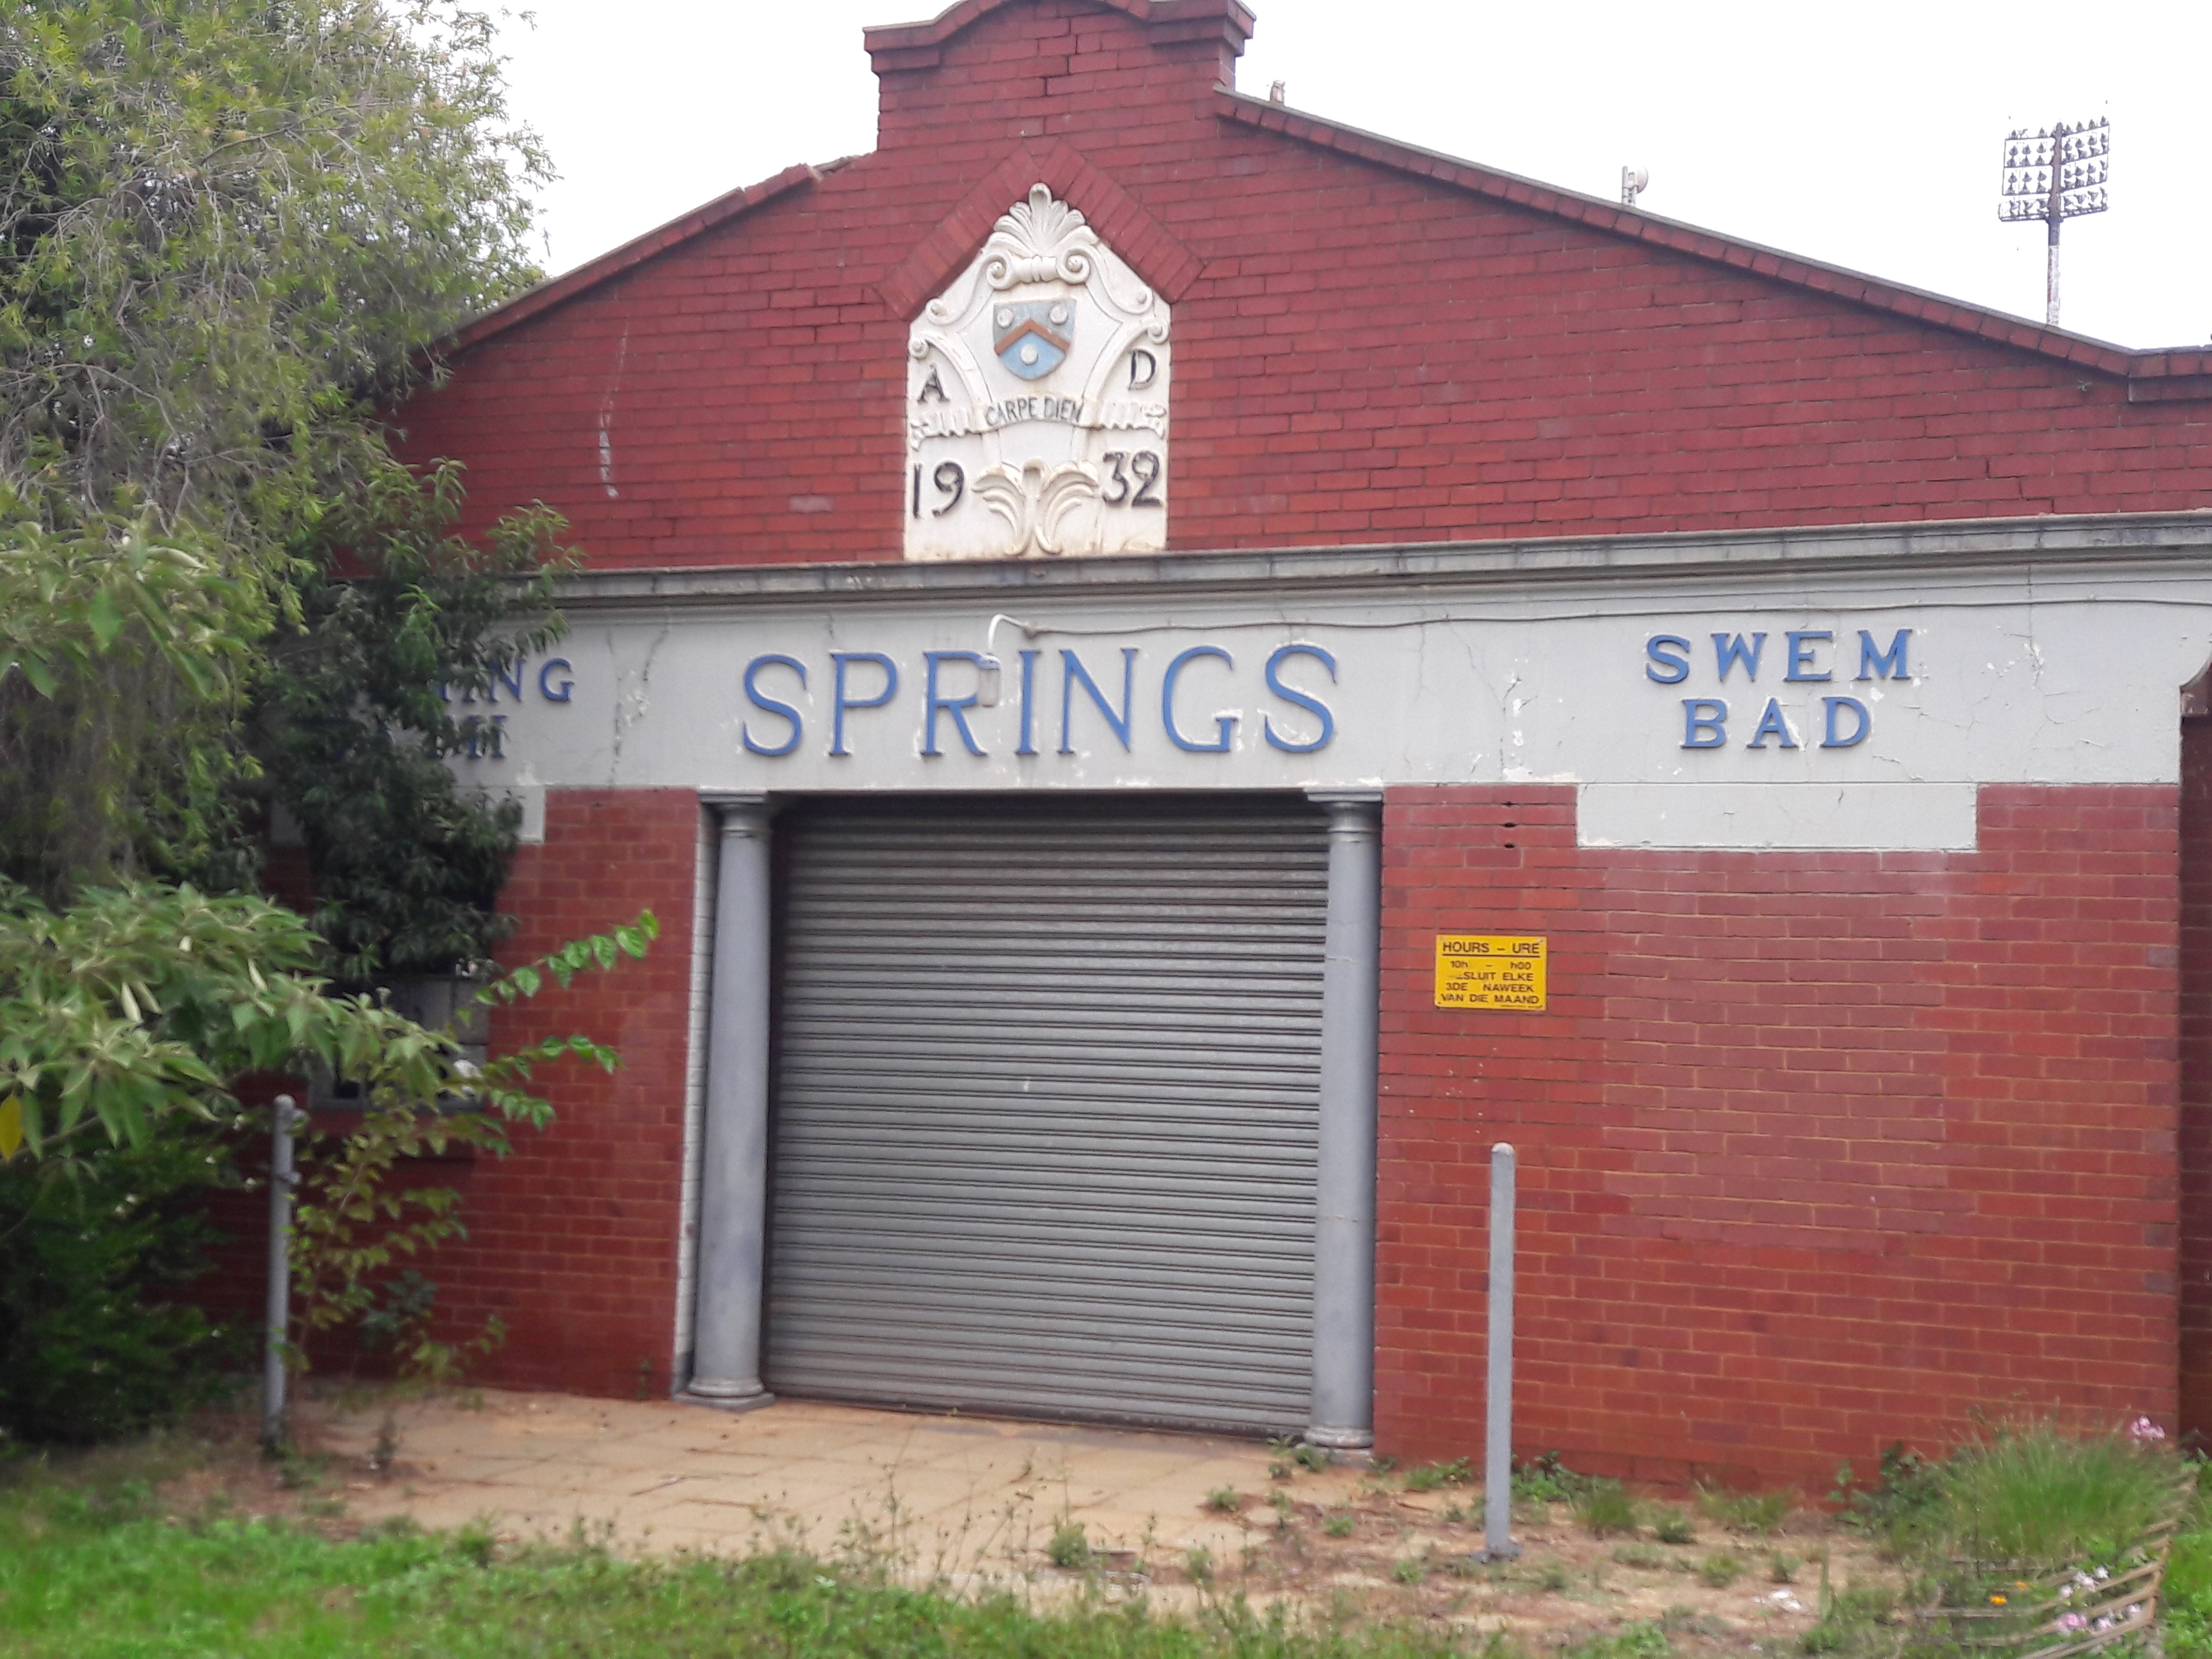 Entrance to Springs swimming pool and the park. Image: Barbara Adair and Sreddy Yen